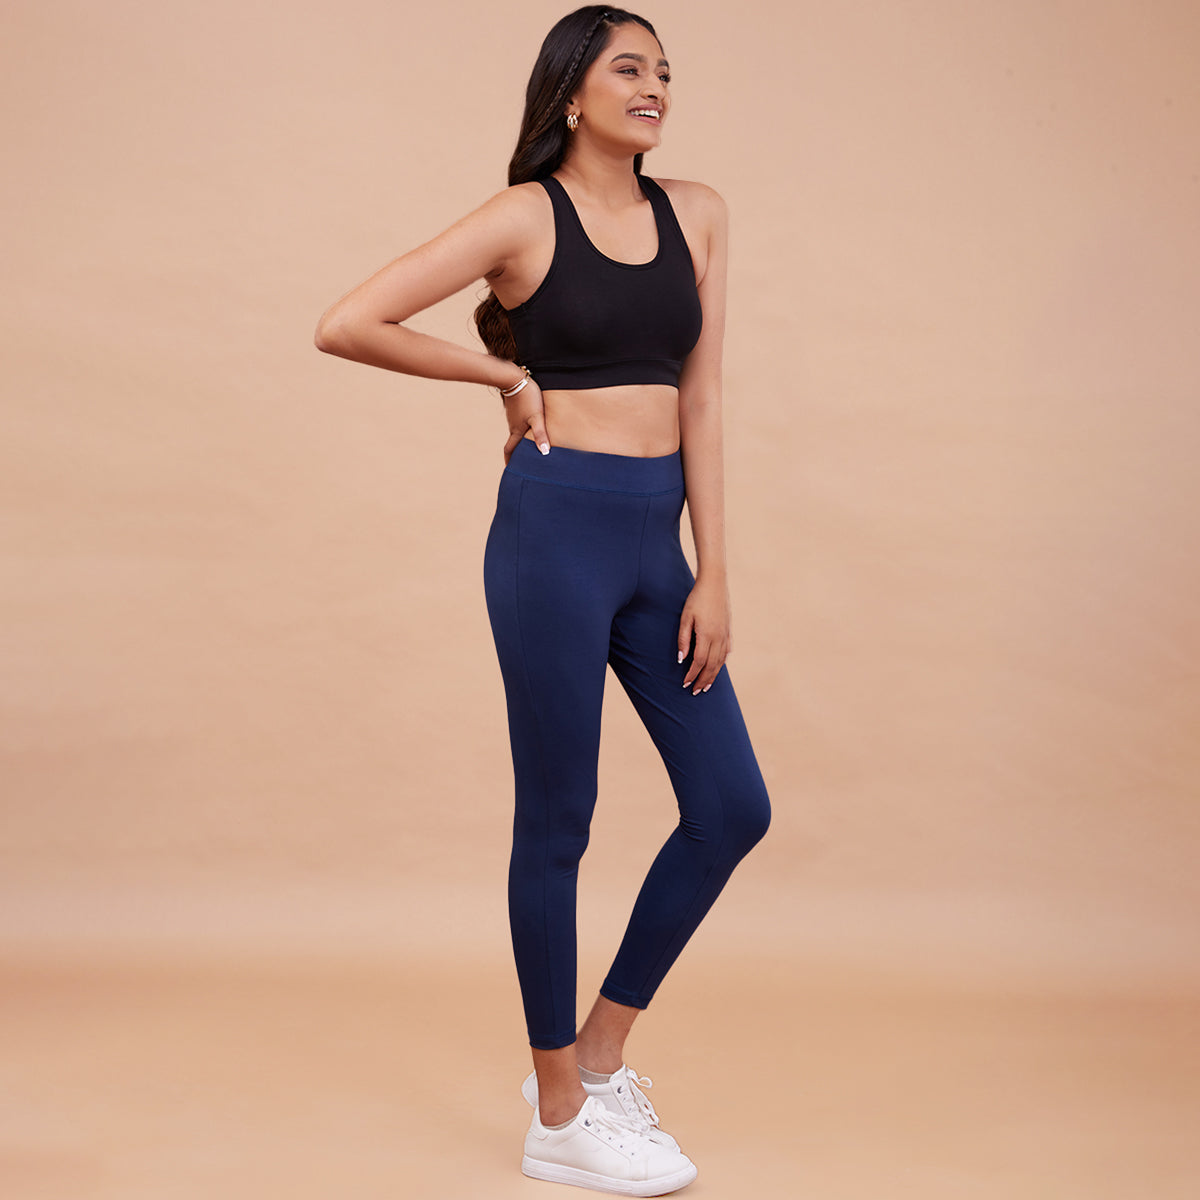 Nykd All day Essential Cotton Sports Bra-NYK059 Anthracite – Nykd by Nykaa